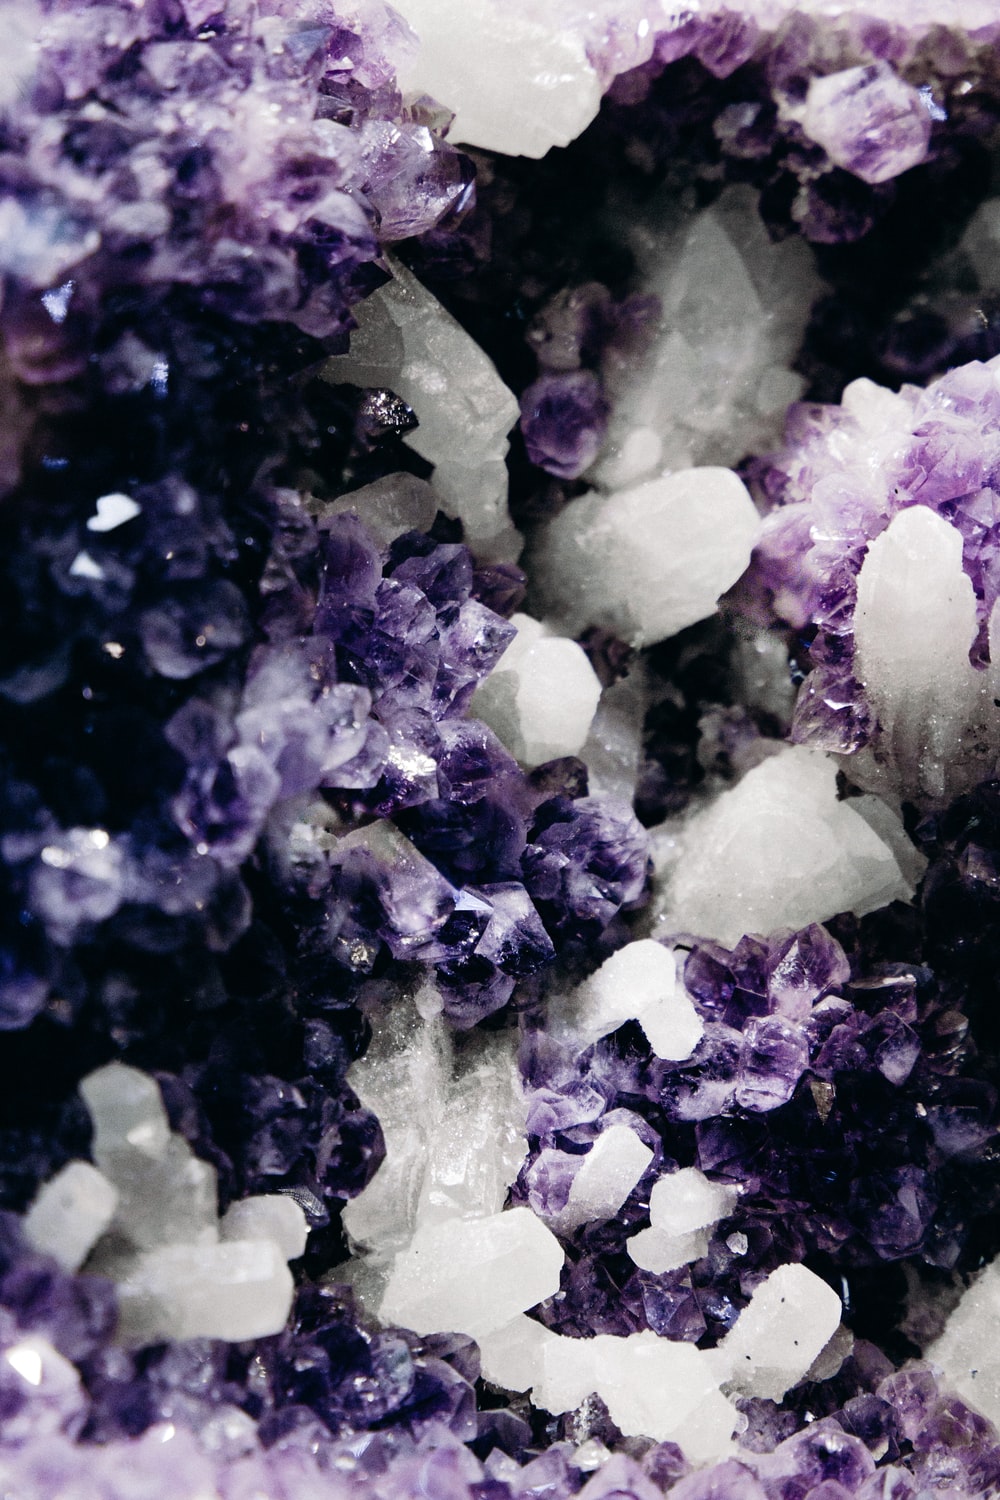 Aesthetic Crystal Wallpapers